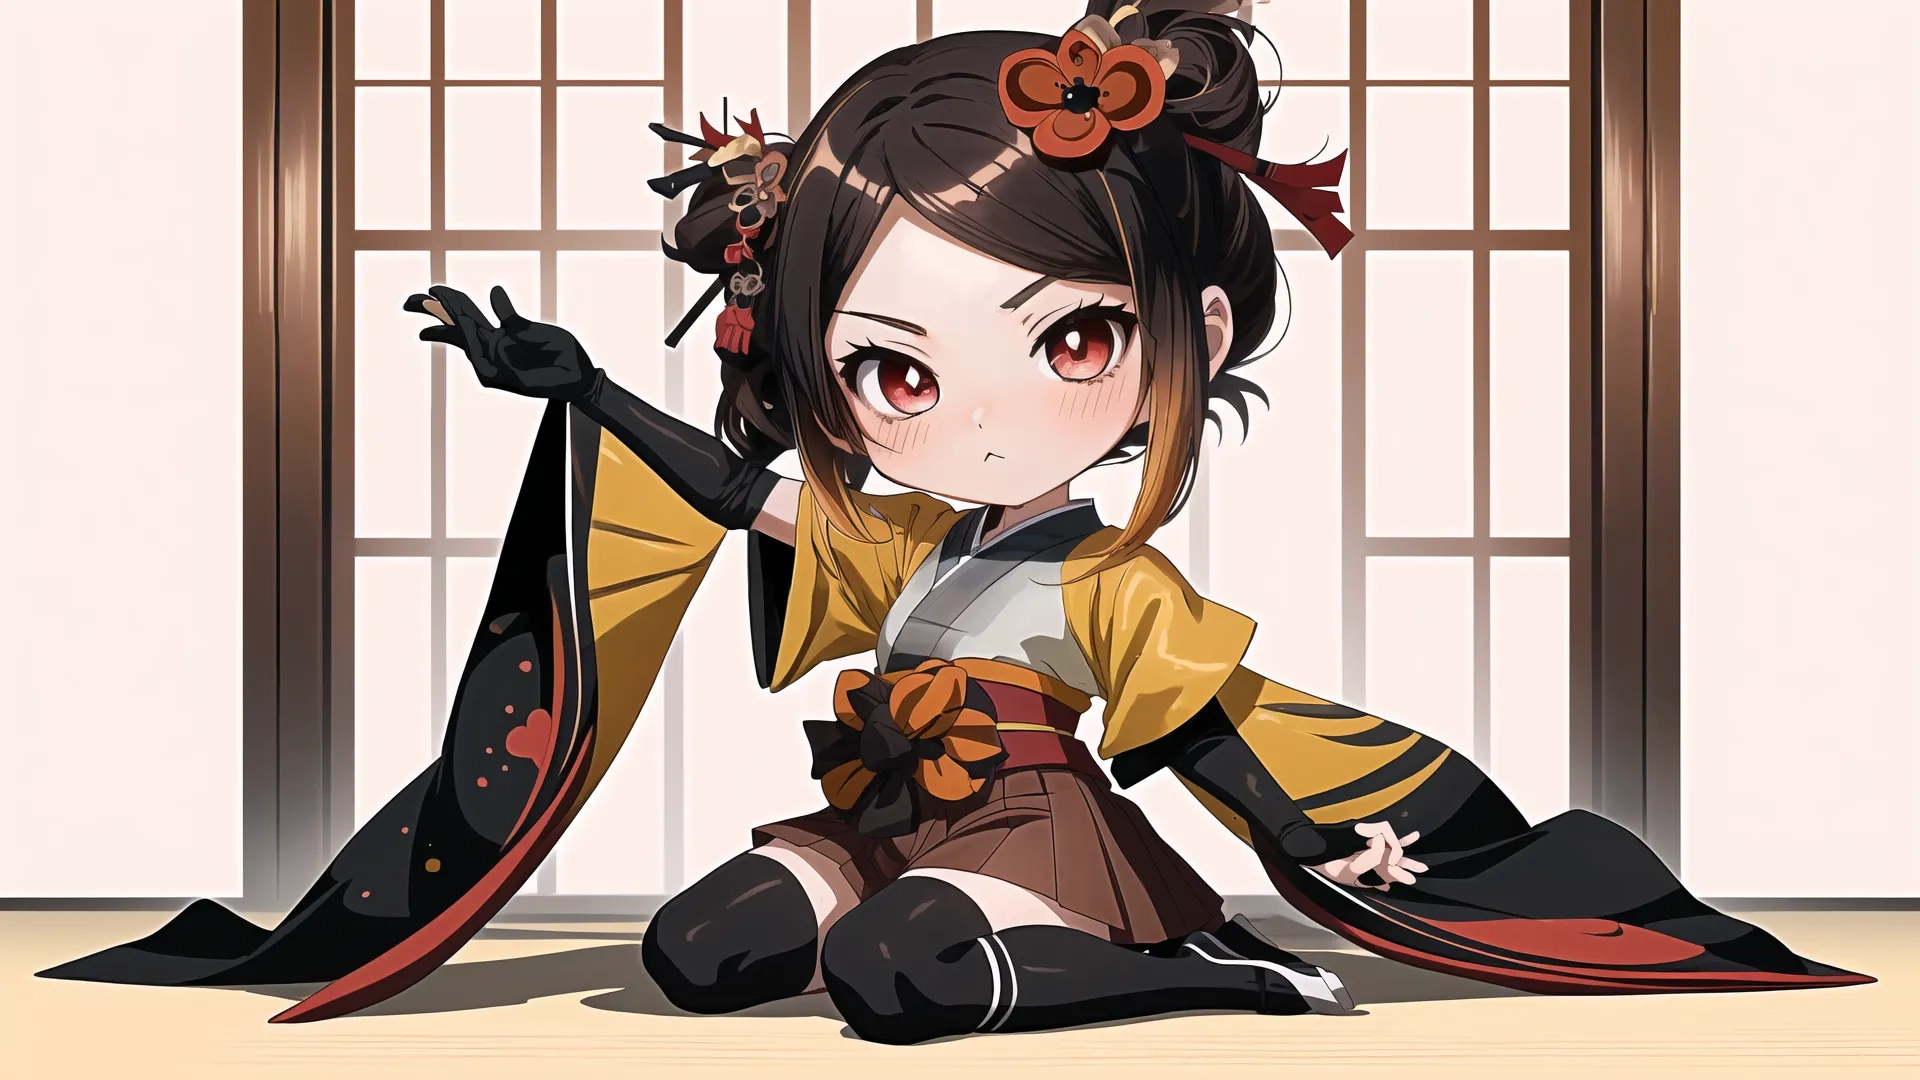 an artistic image of a young woman in costume sitting on the floor in front of window silles with long black hair and holding a sword
